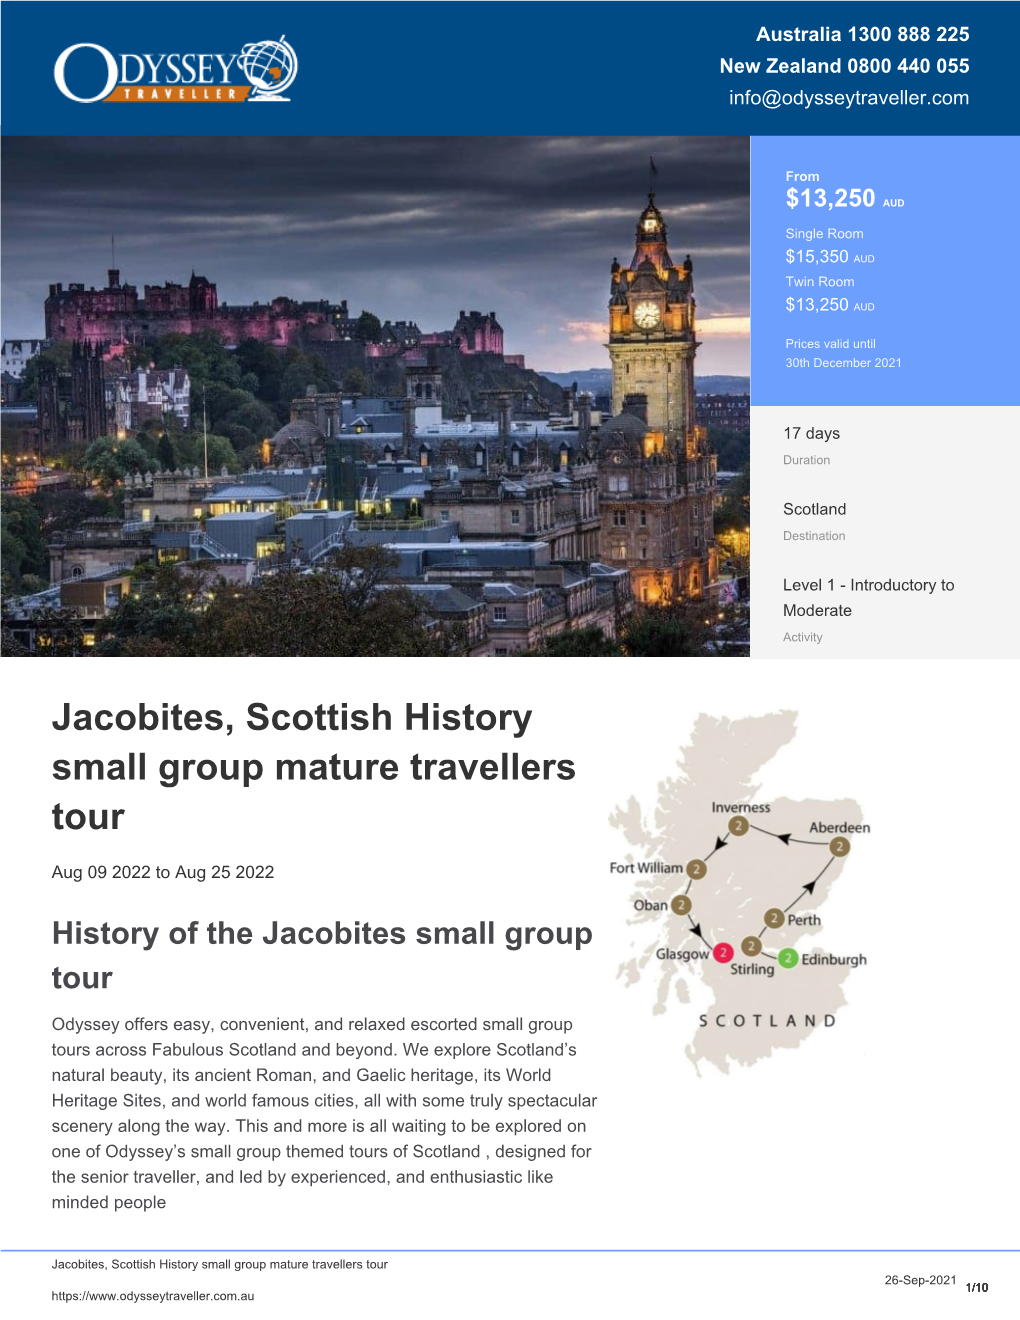 Jacobites History | Scottish Small Group Tour | Odyssey Traveller